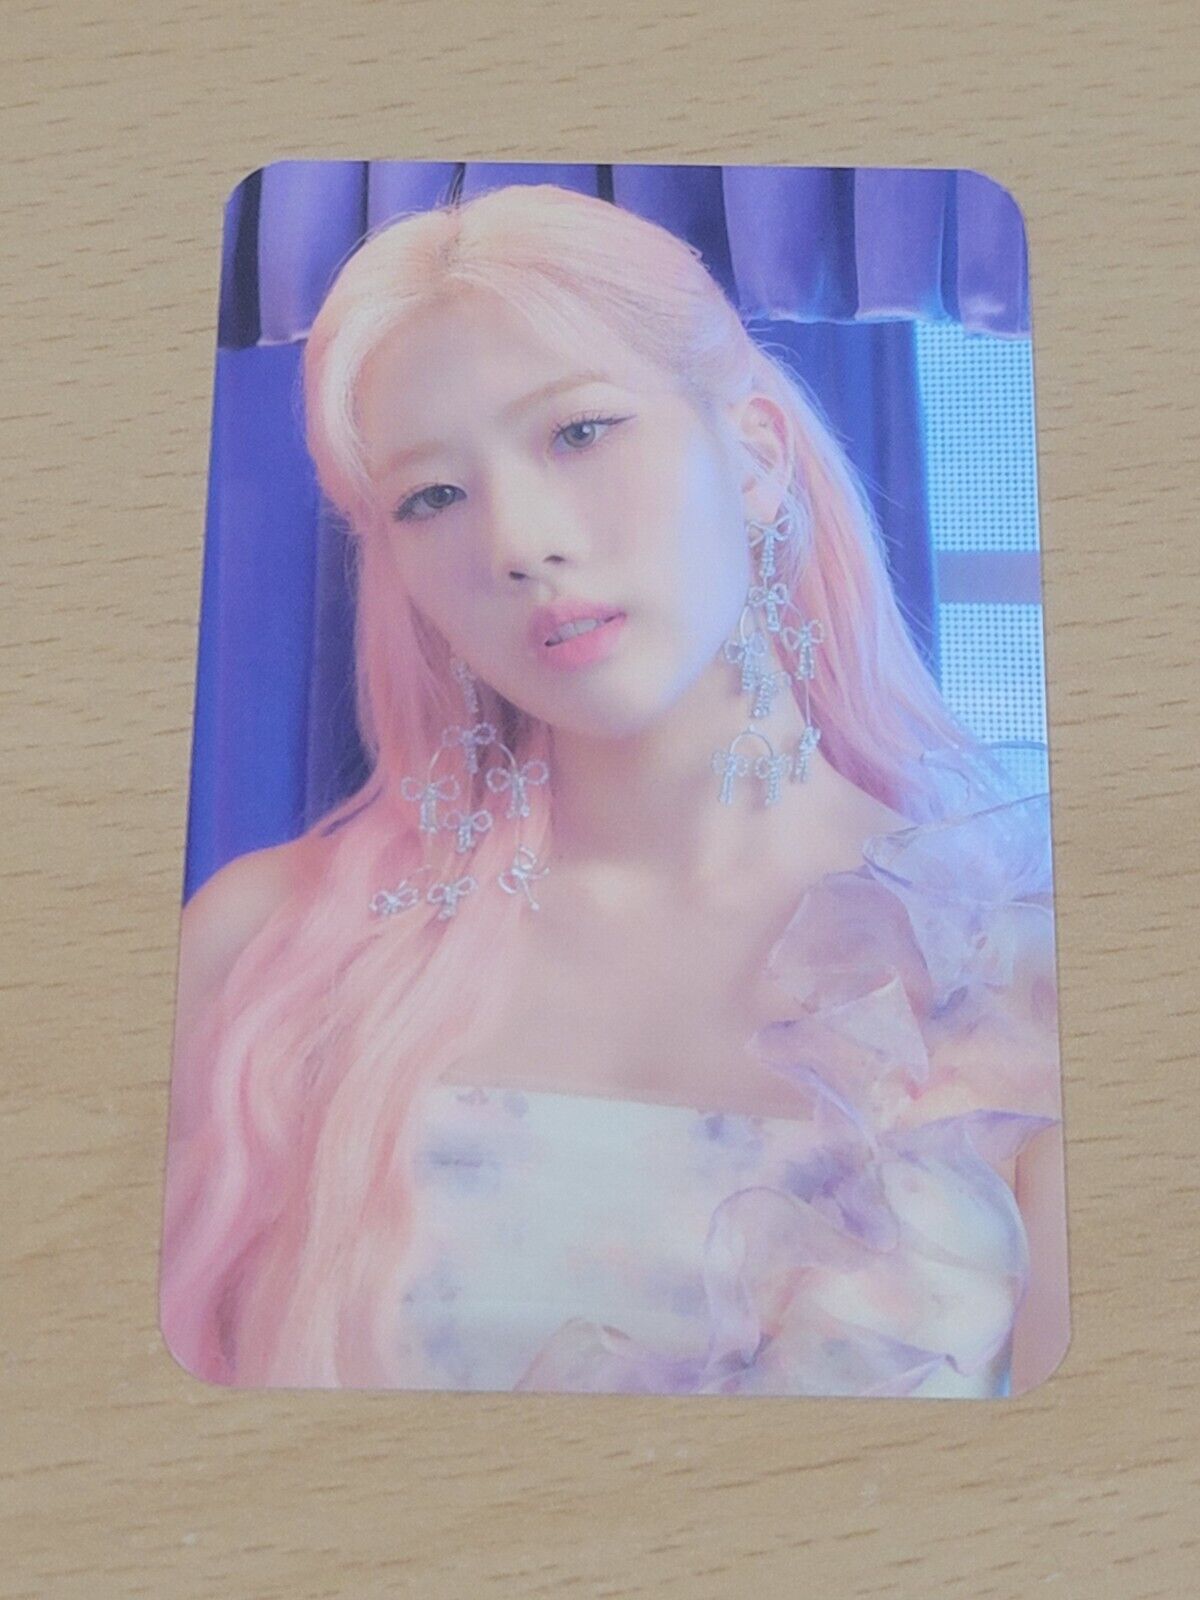 LOONA - 'Flip That' Official Merchandise MD Everline Photocard